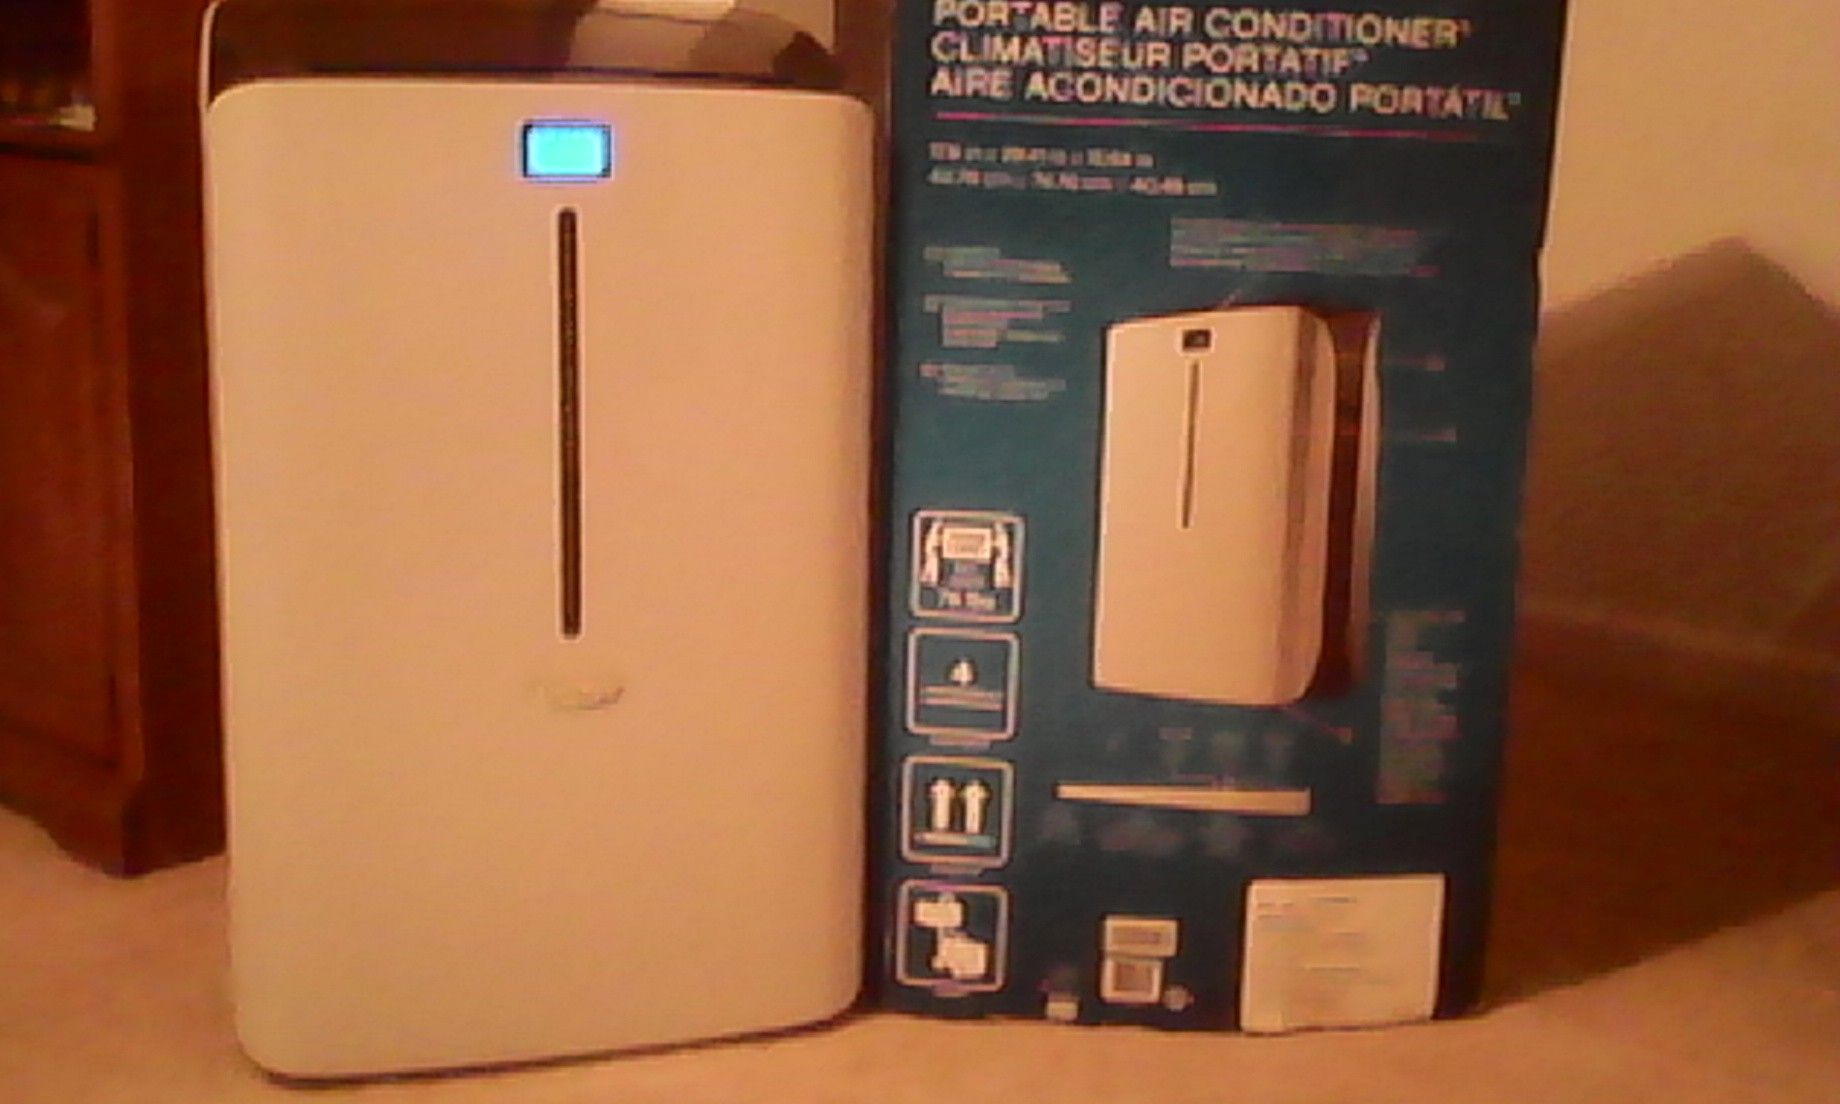 Idylis portable air conditioner, 10,000 btu's, new with box. Efficiency and style.